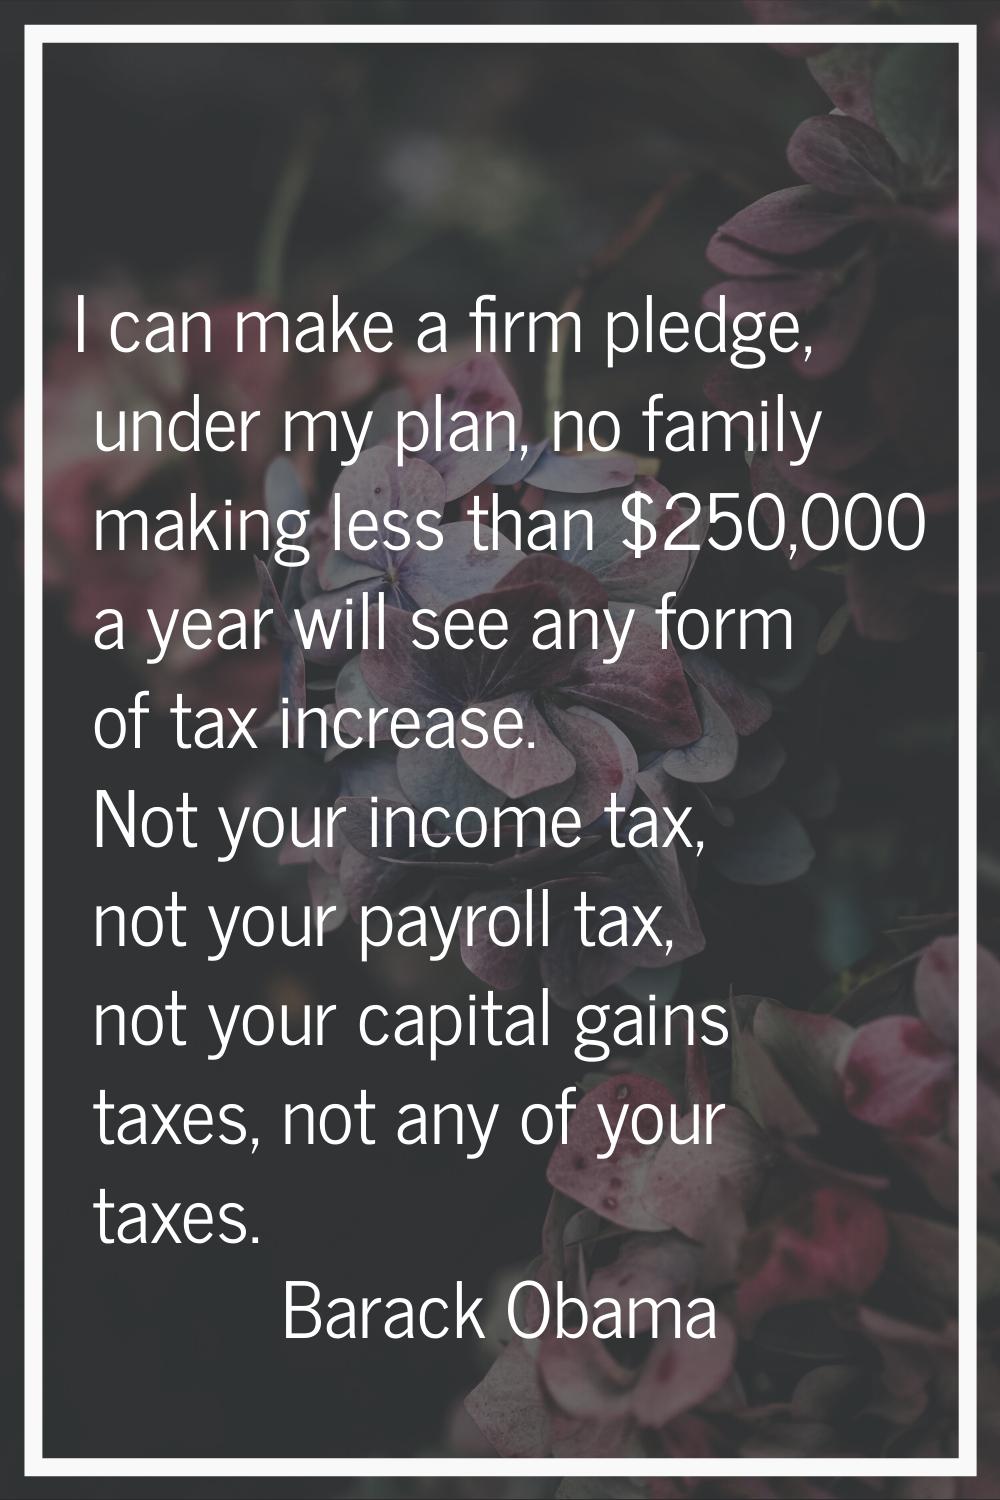 I can make a firm pledge, under my plan, no family making less than $250,000 a year will see any fo